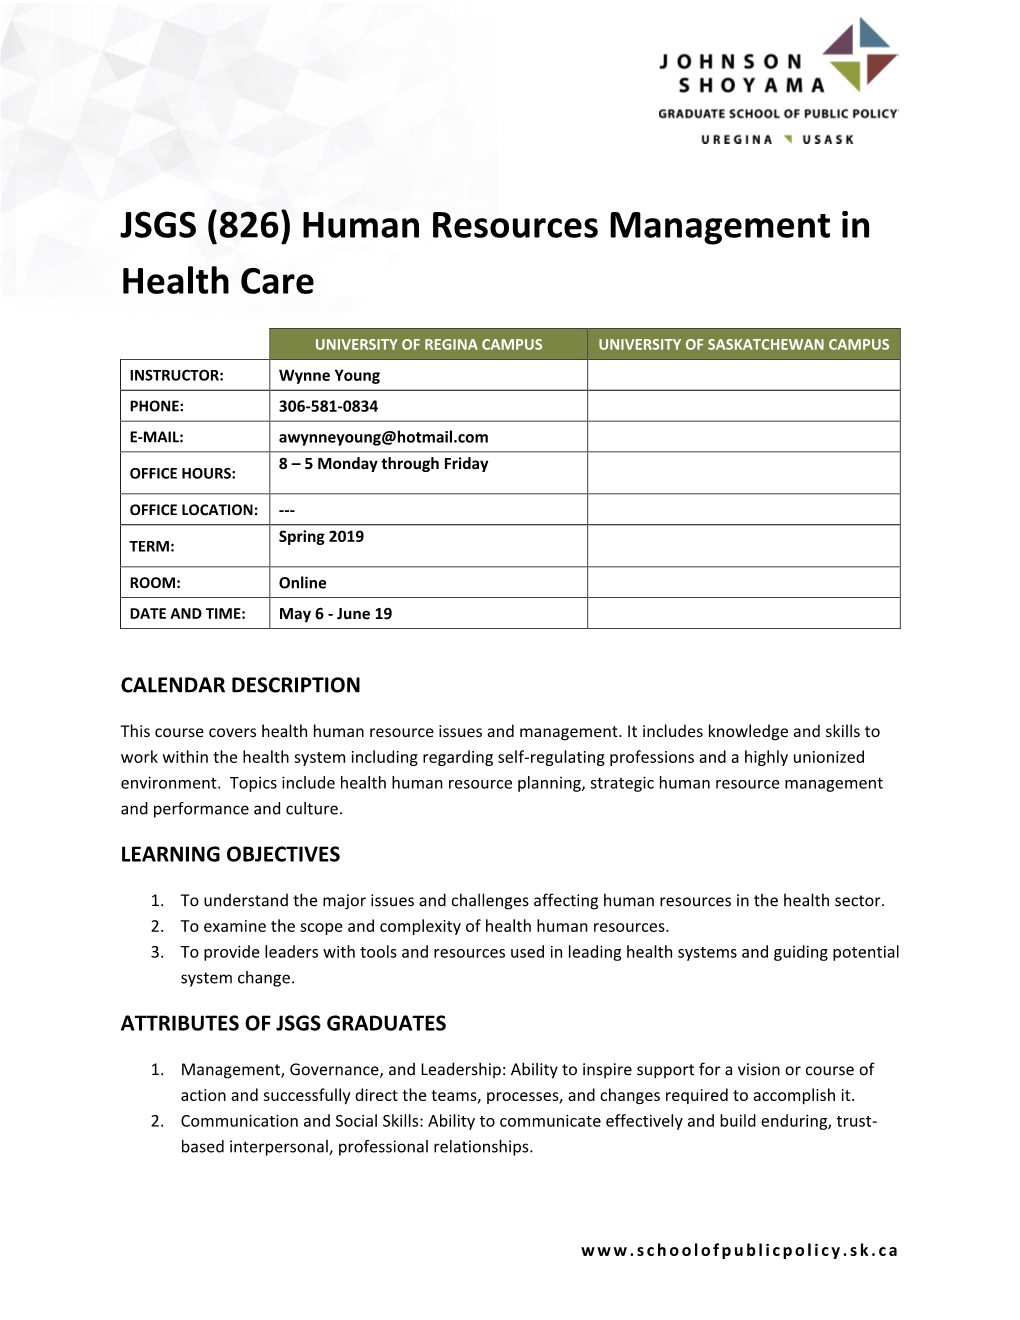 JSGS (826) Human Resources Management in Health Care